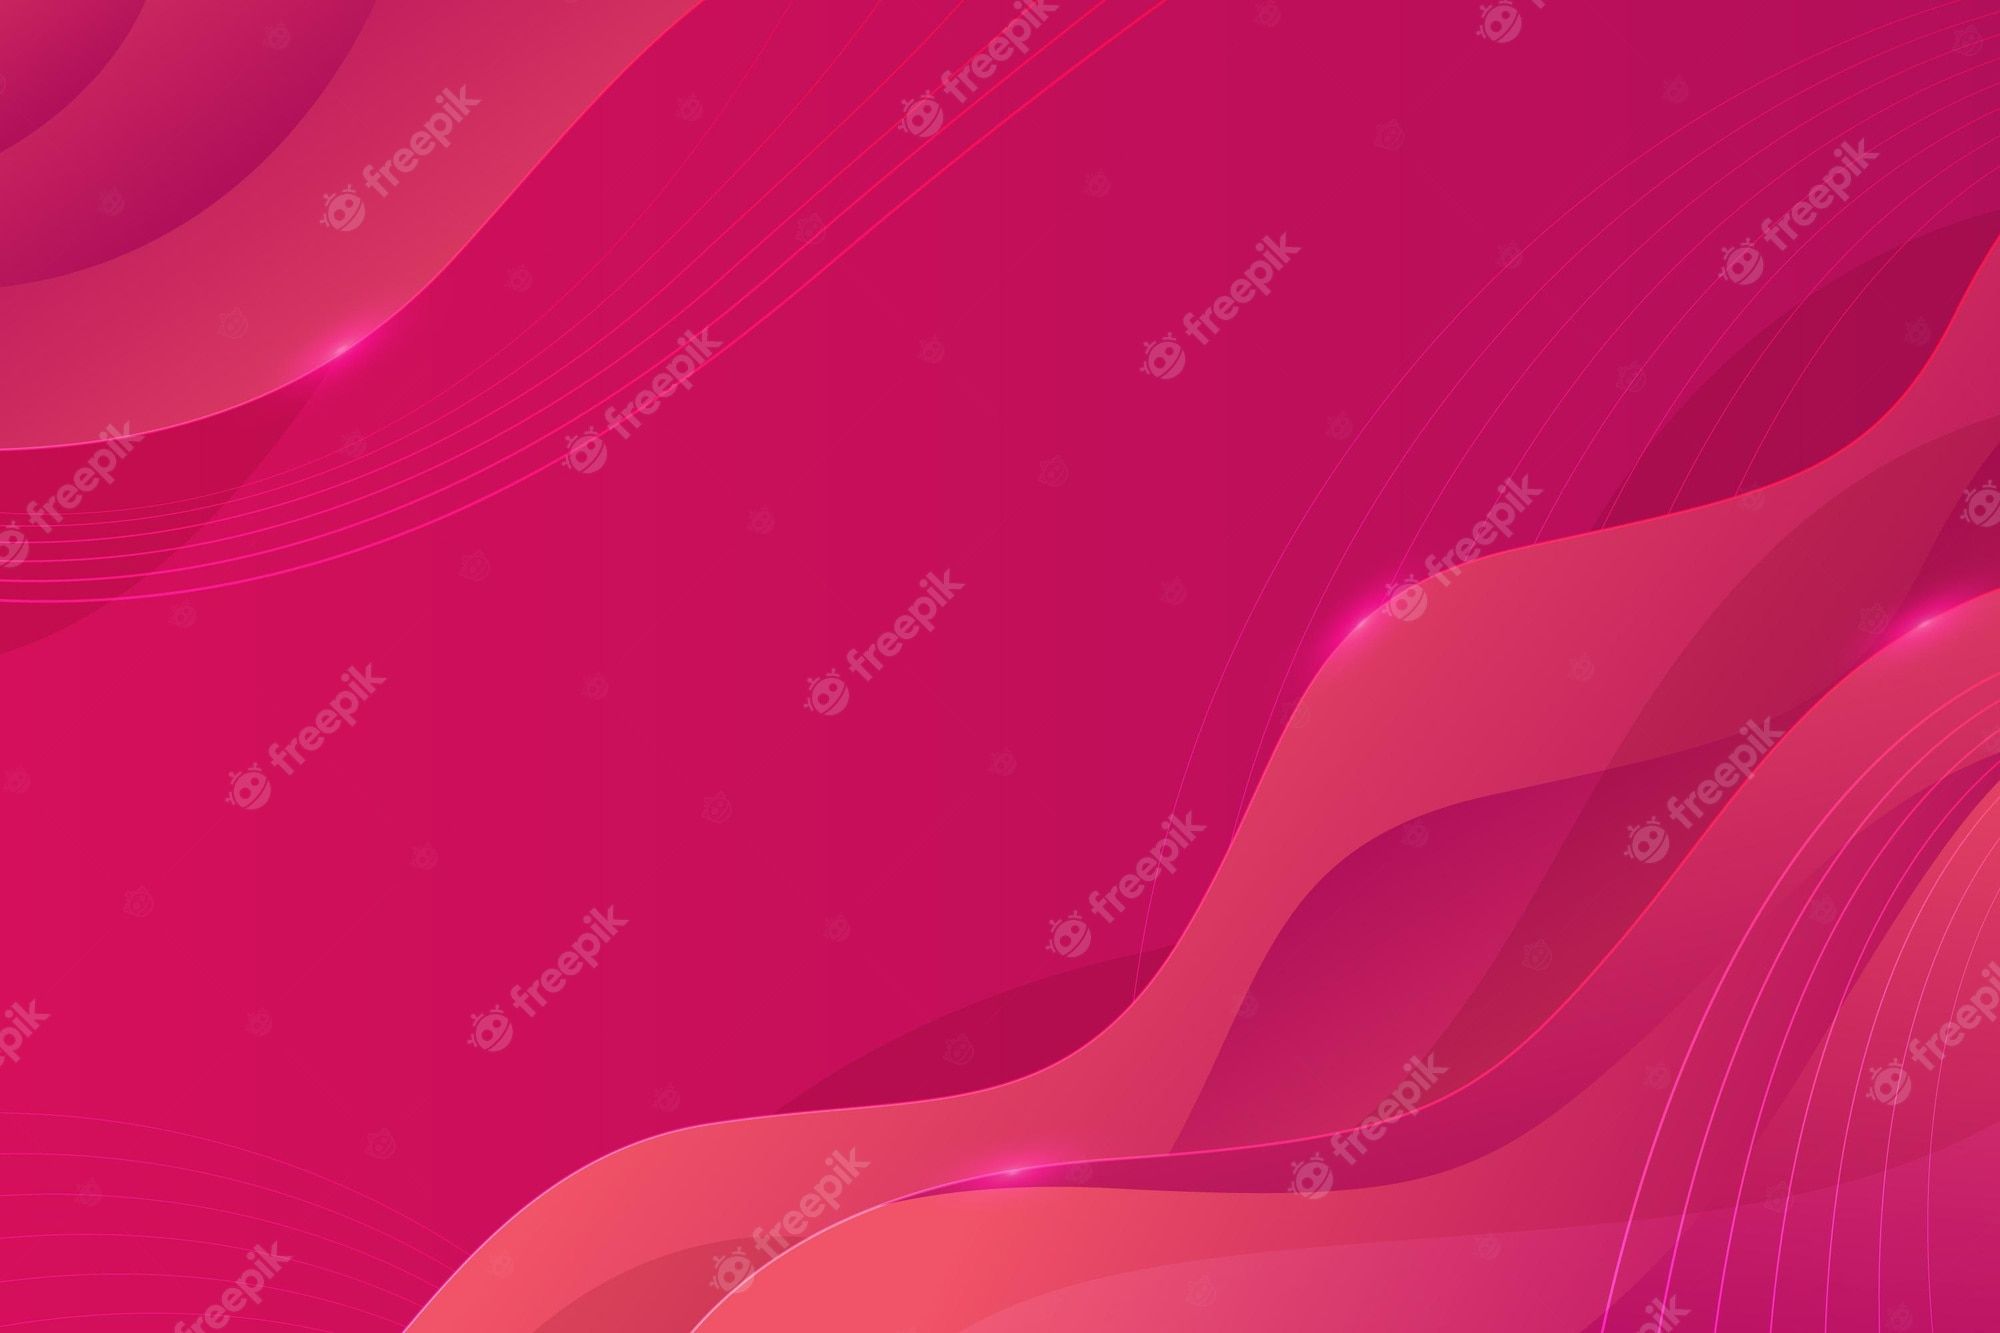 Abstract pink wave background - Hot pink